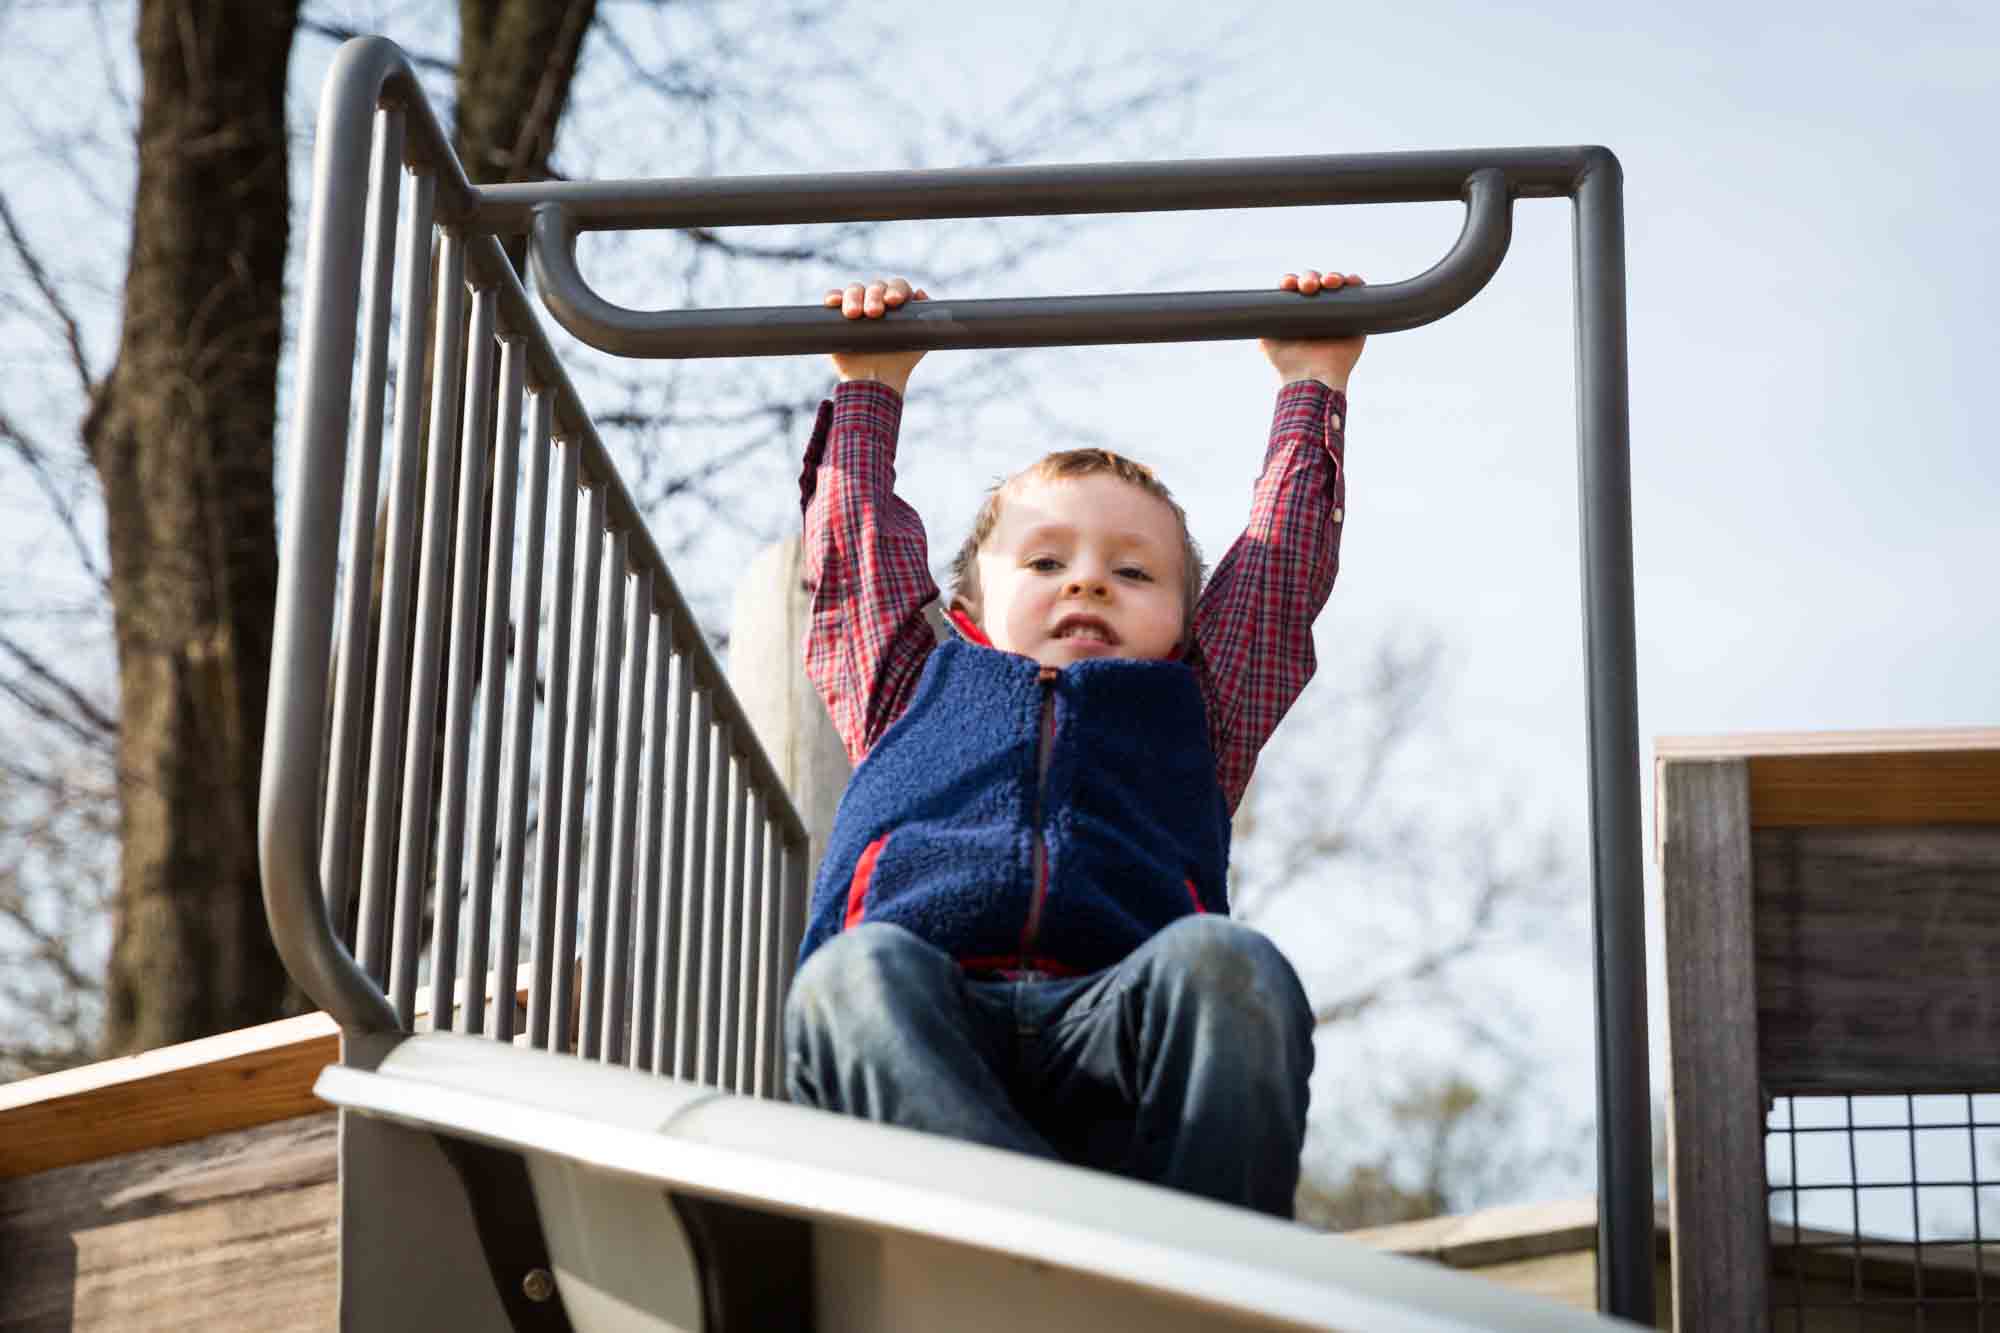 Child on playground equipment for an article on the best family portrait poses